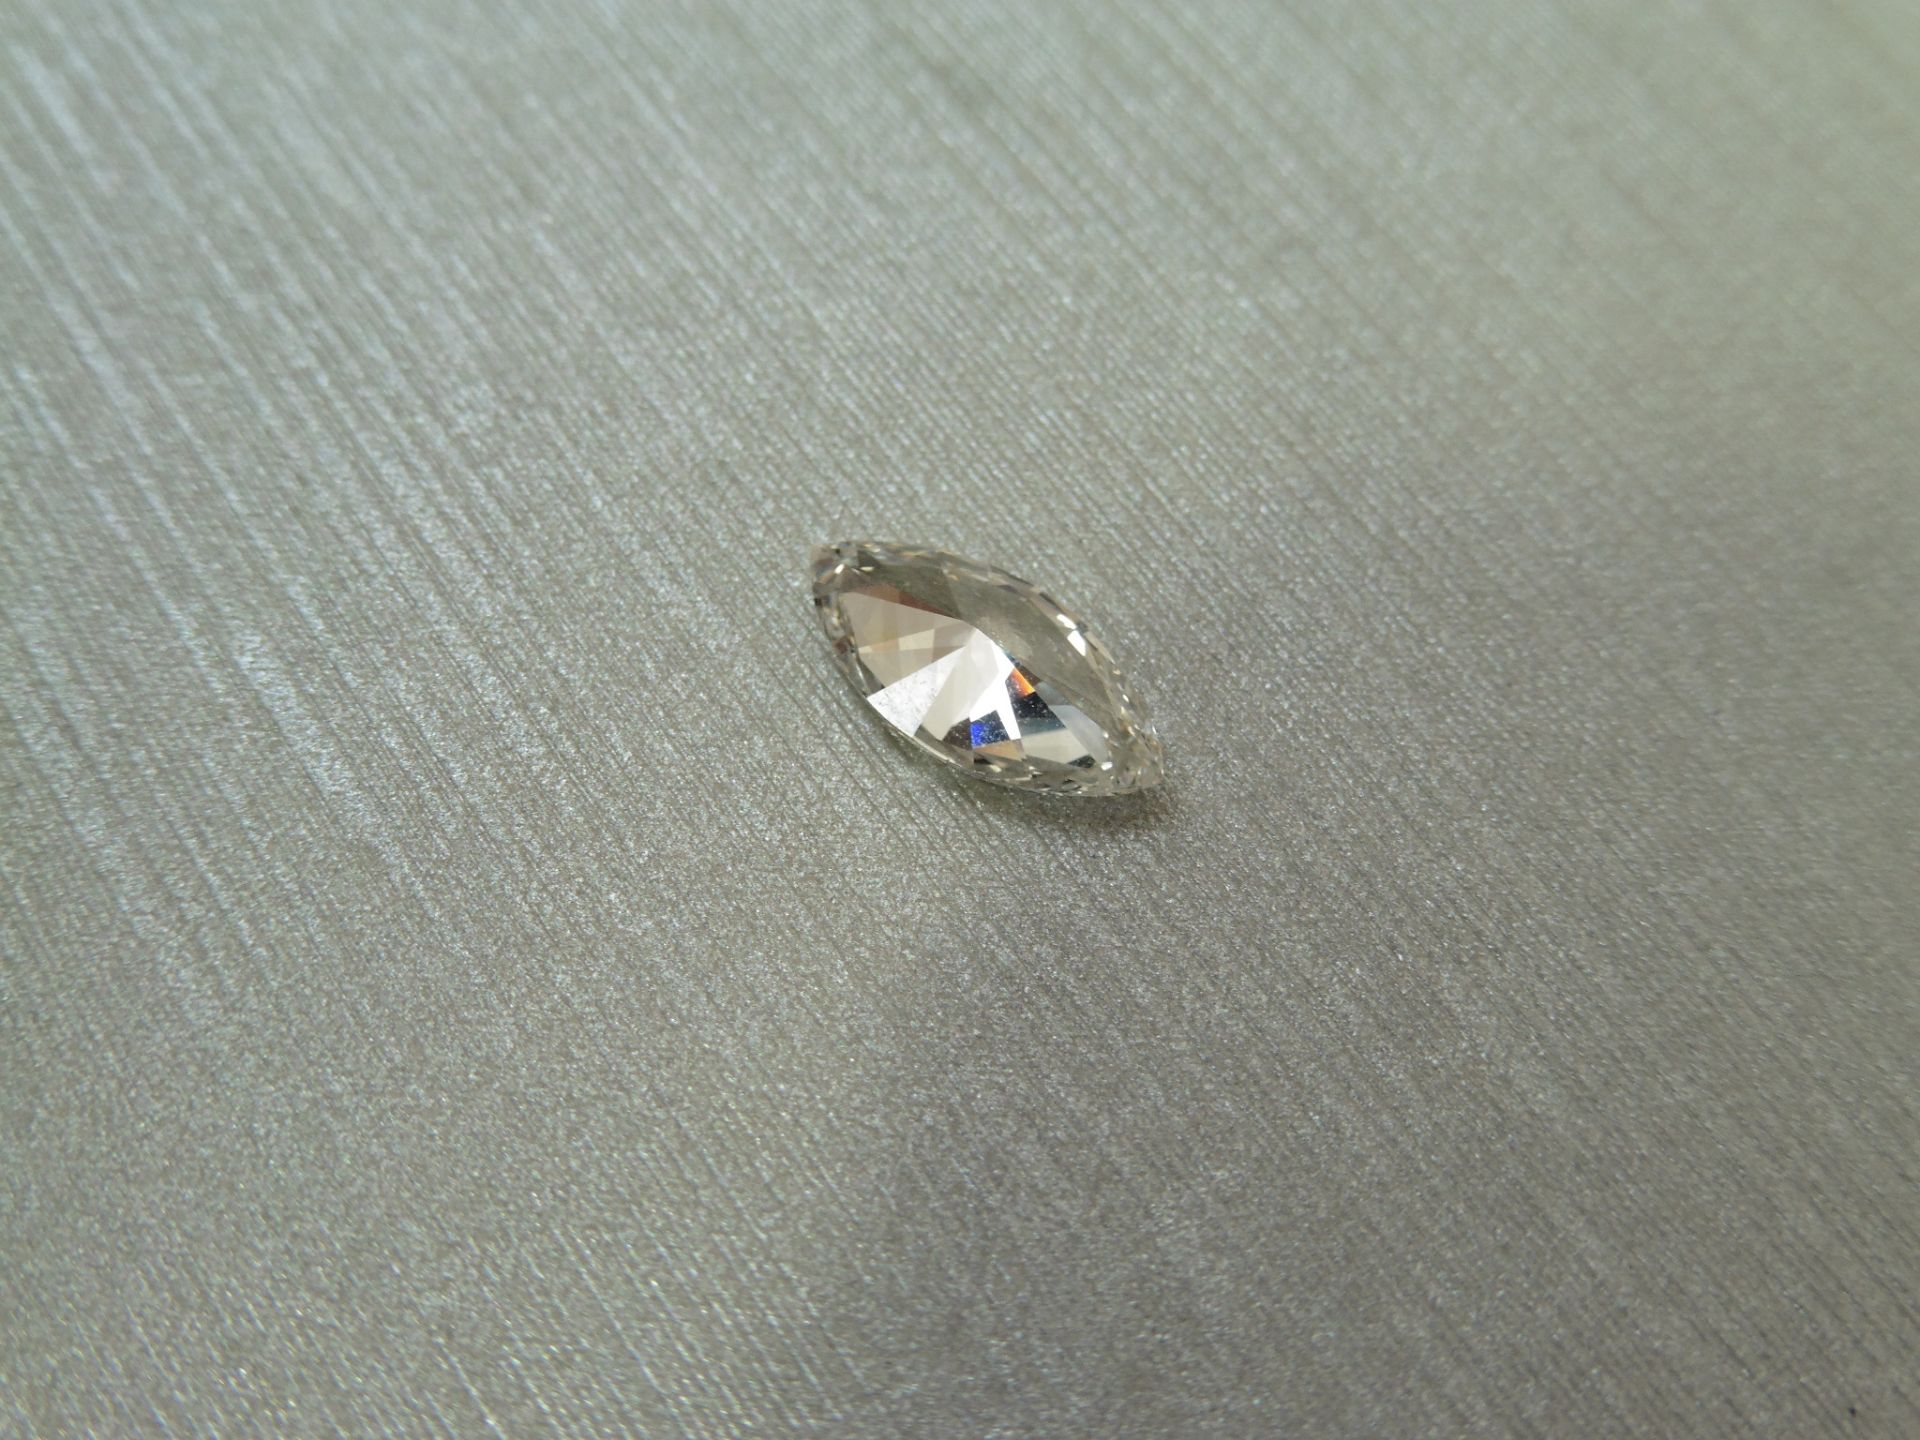 1.73ct single marquise cut diamond. Measurements 12.90 x 6.44 x 3.32mm. F colour and SI2 clarity. - Image 3 of 6